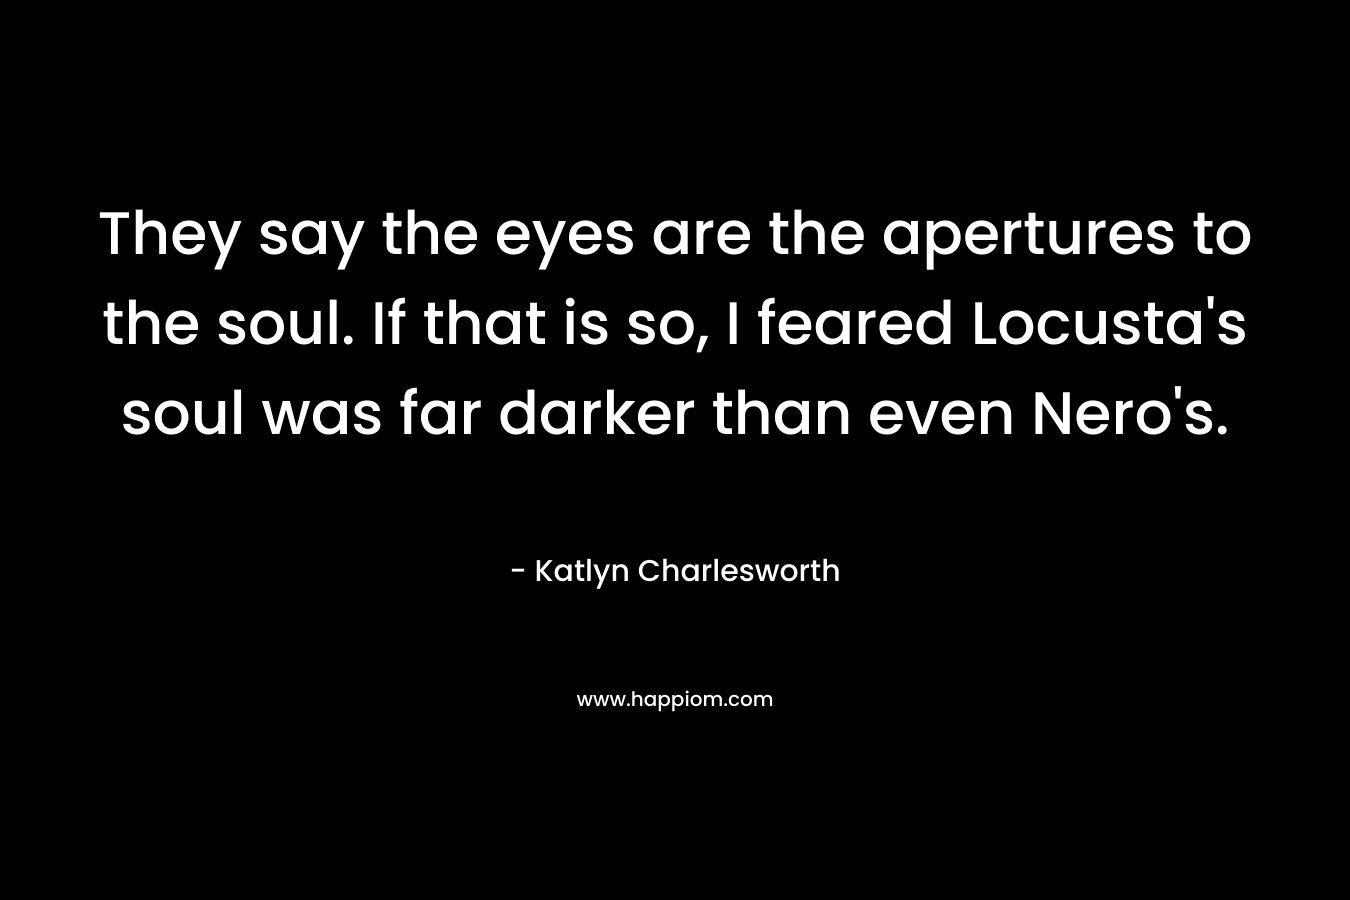 They say the eyes are the apertures to the soul. If that is so, I feared Locusta’s soul was far darker than even Nero’s. – Katlyn Charlesworth